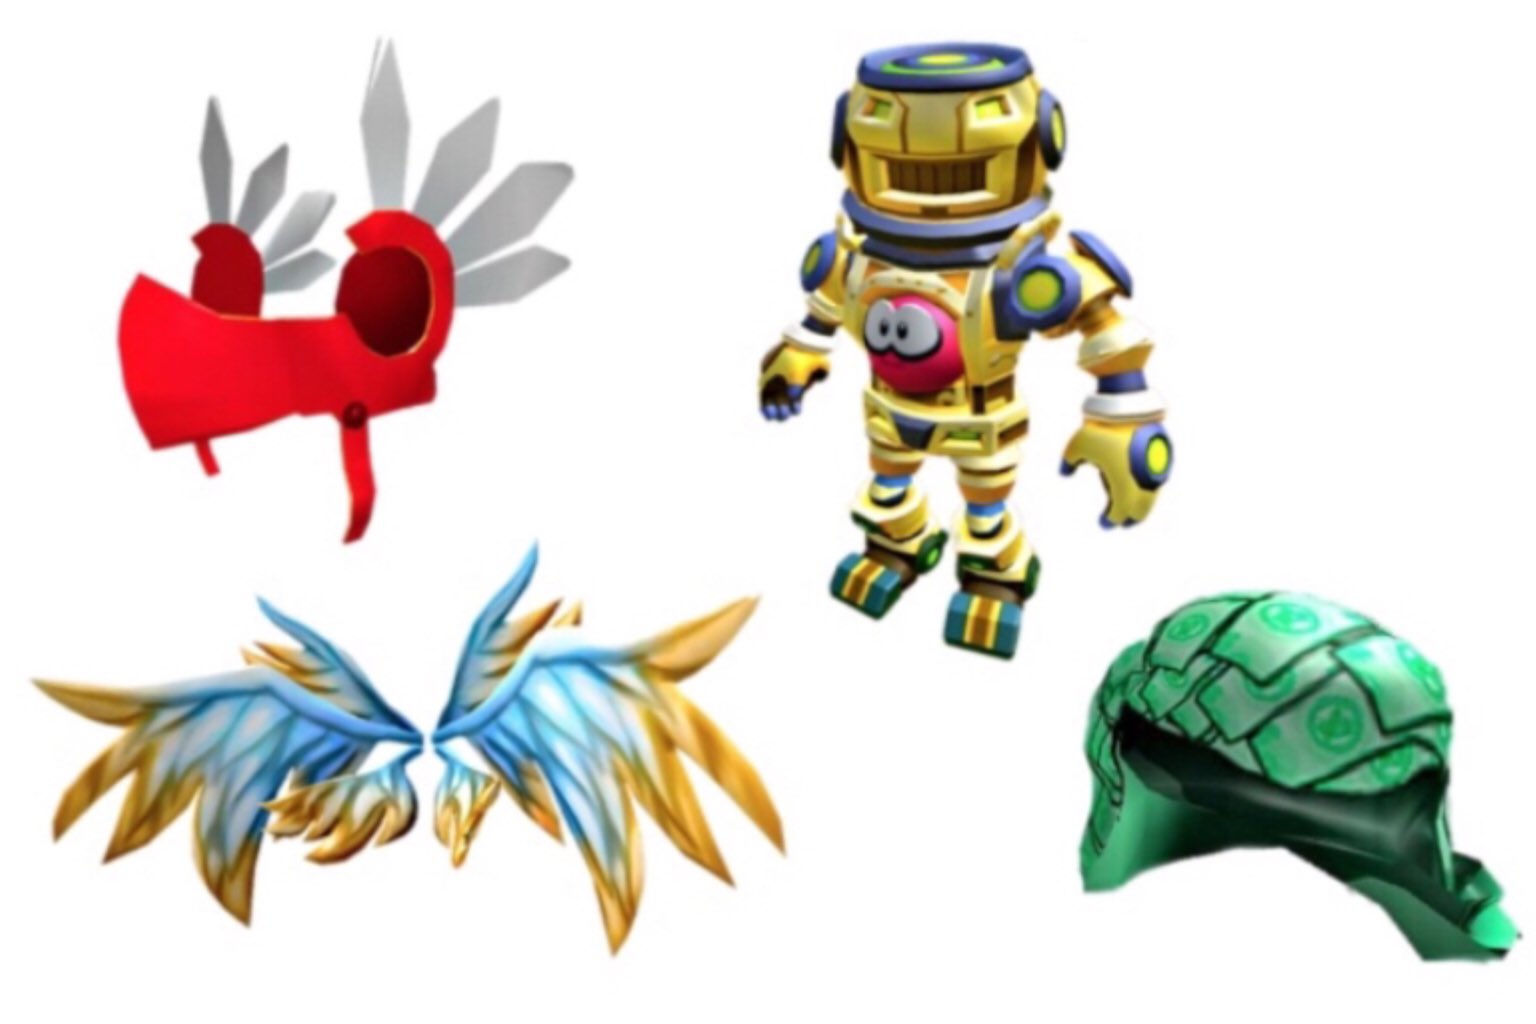 Red Valk Toy Roblox Cheap Buy Online - roblox wiki redvalk